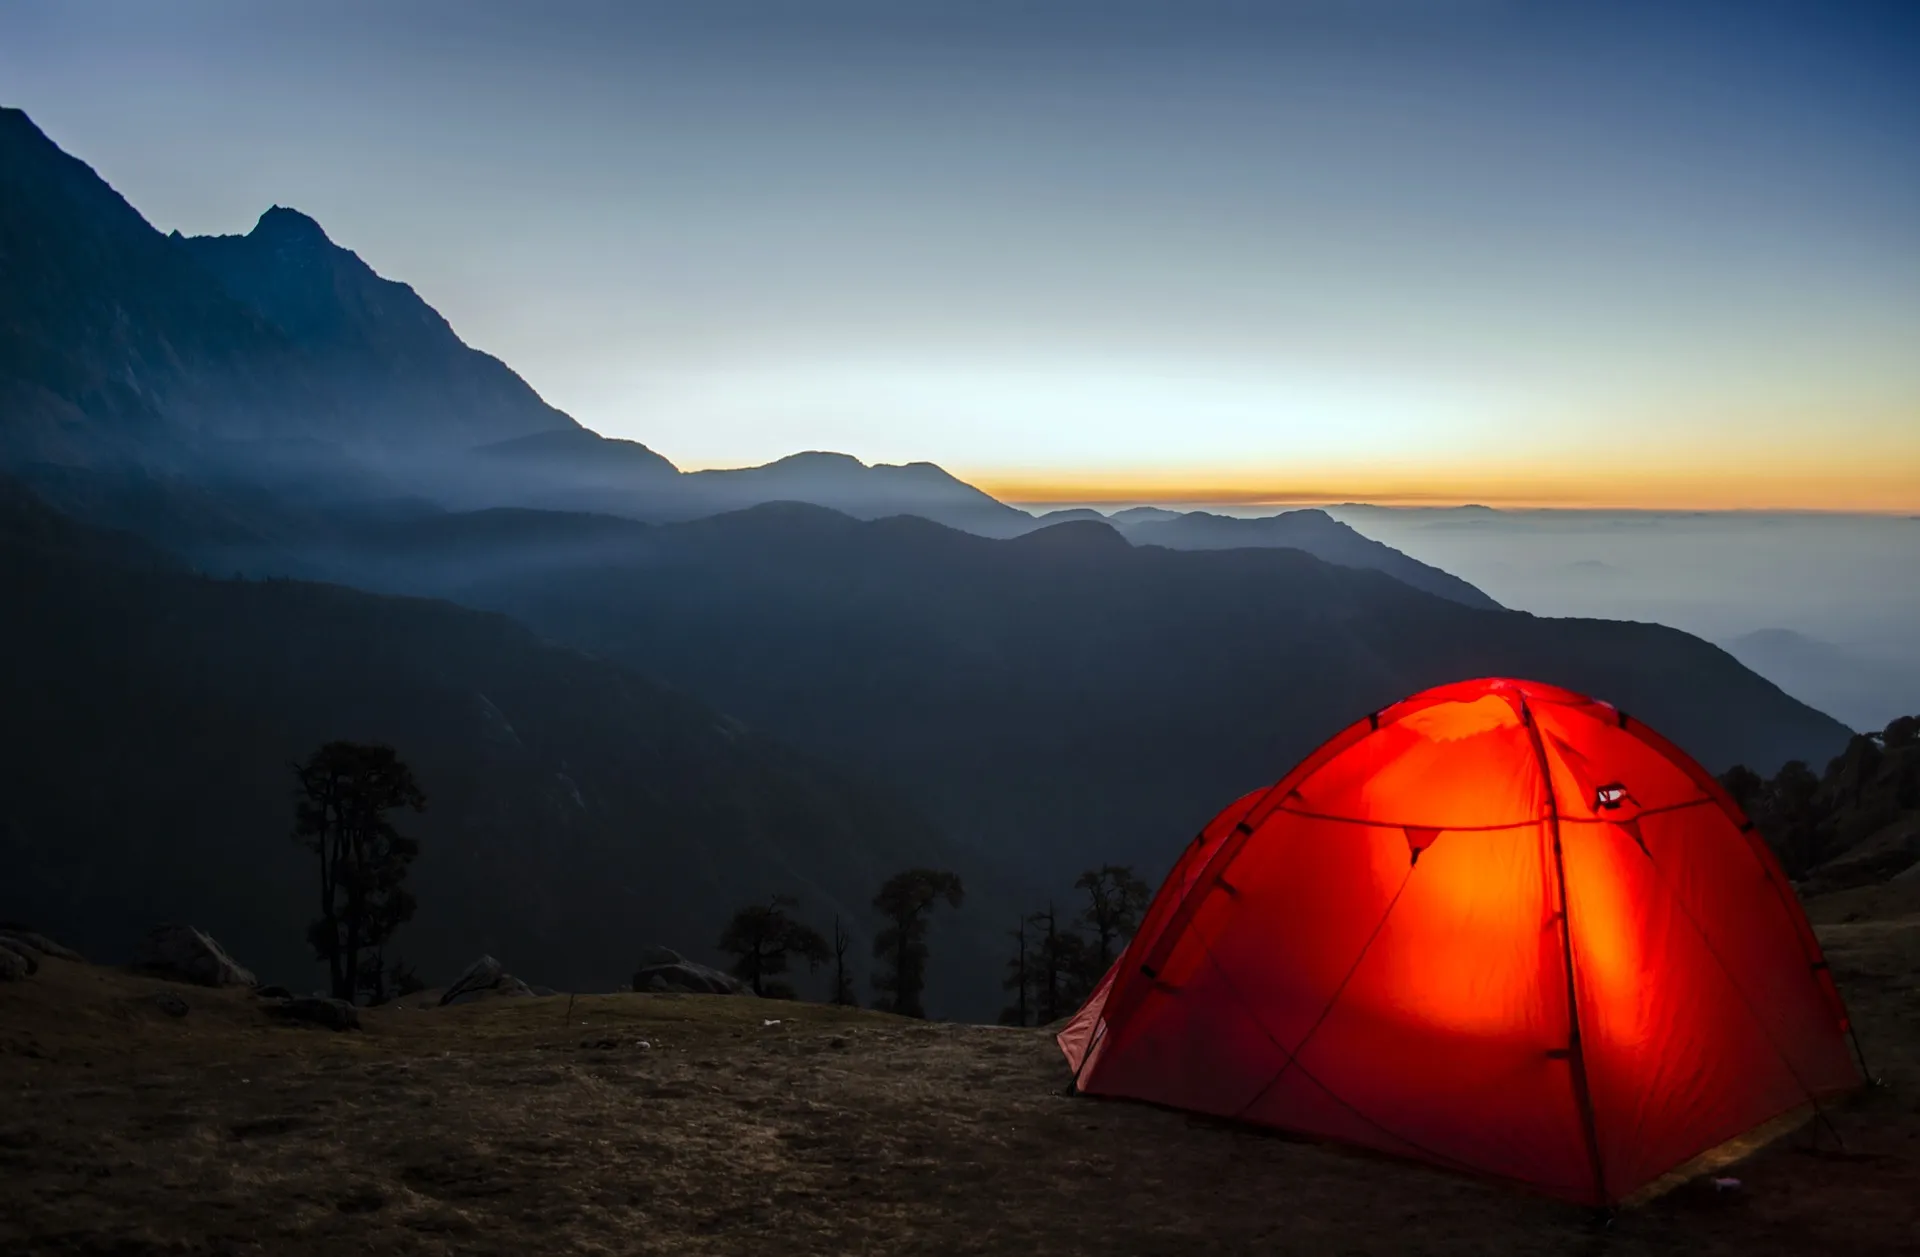 A tent is set up on top of a mountain, prepared for all types of weather